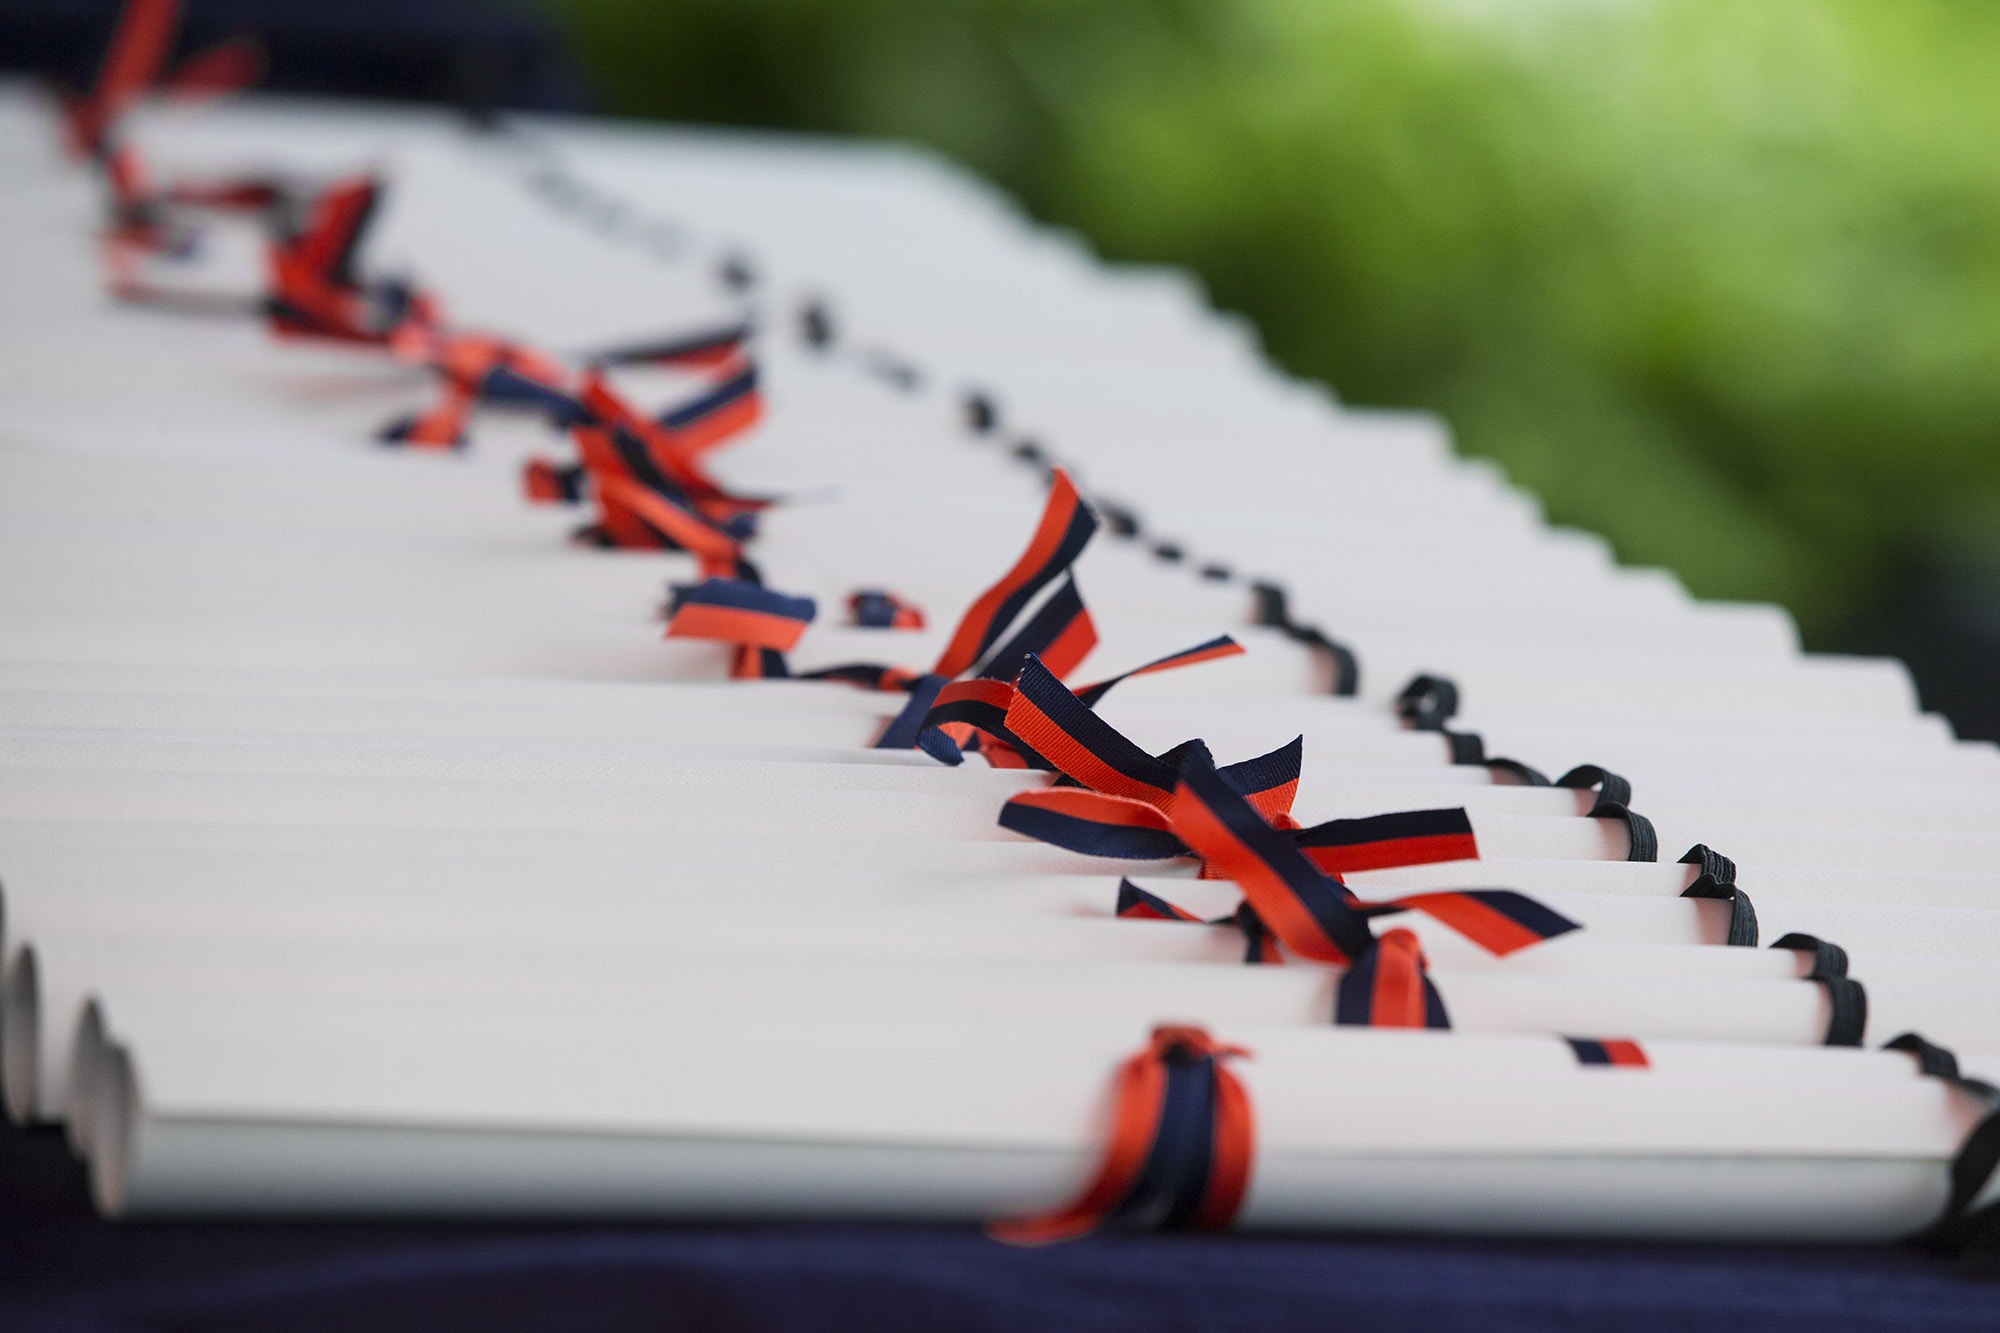 Rolled Diplomas lined on table tied with Orange and Blue Ribbons